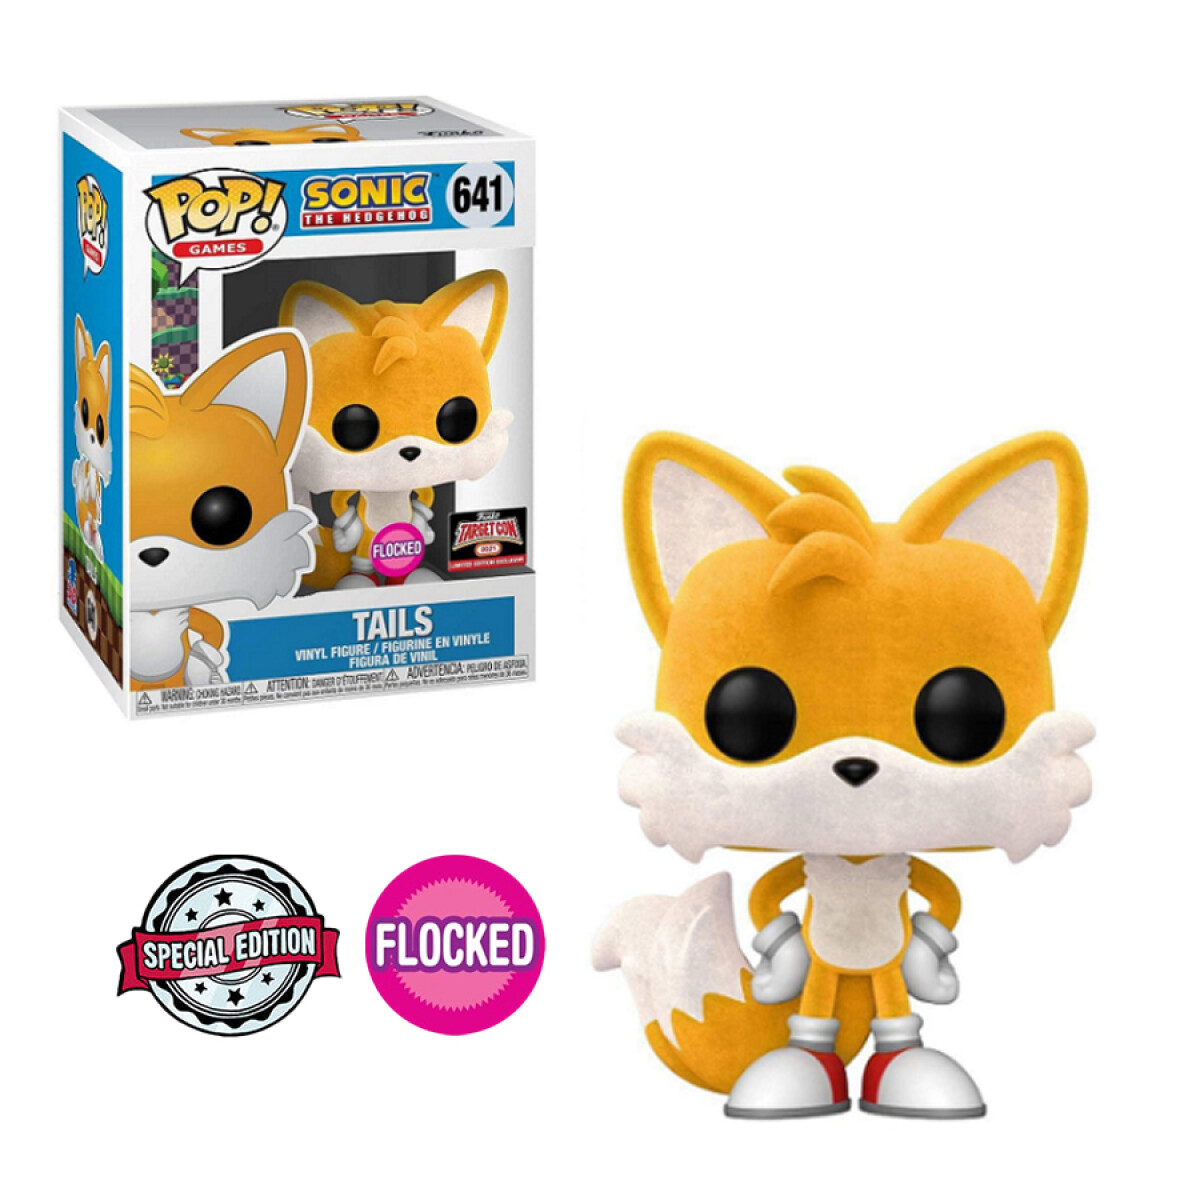 Tails [Flocked] Sonic The Hedgehog - 641 